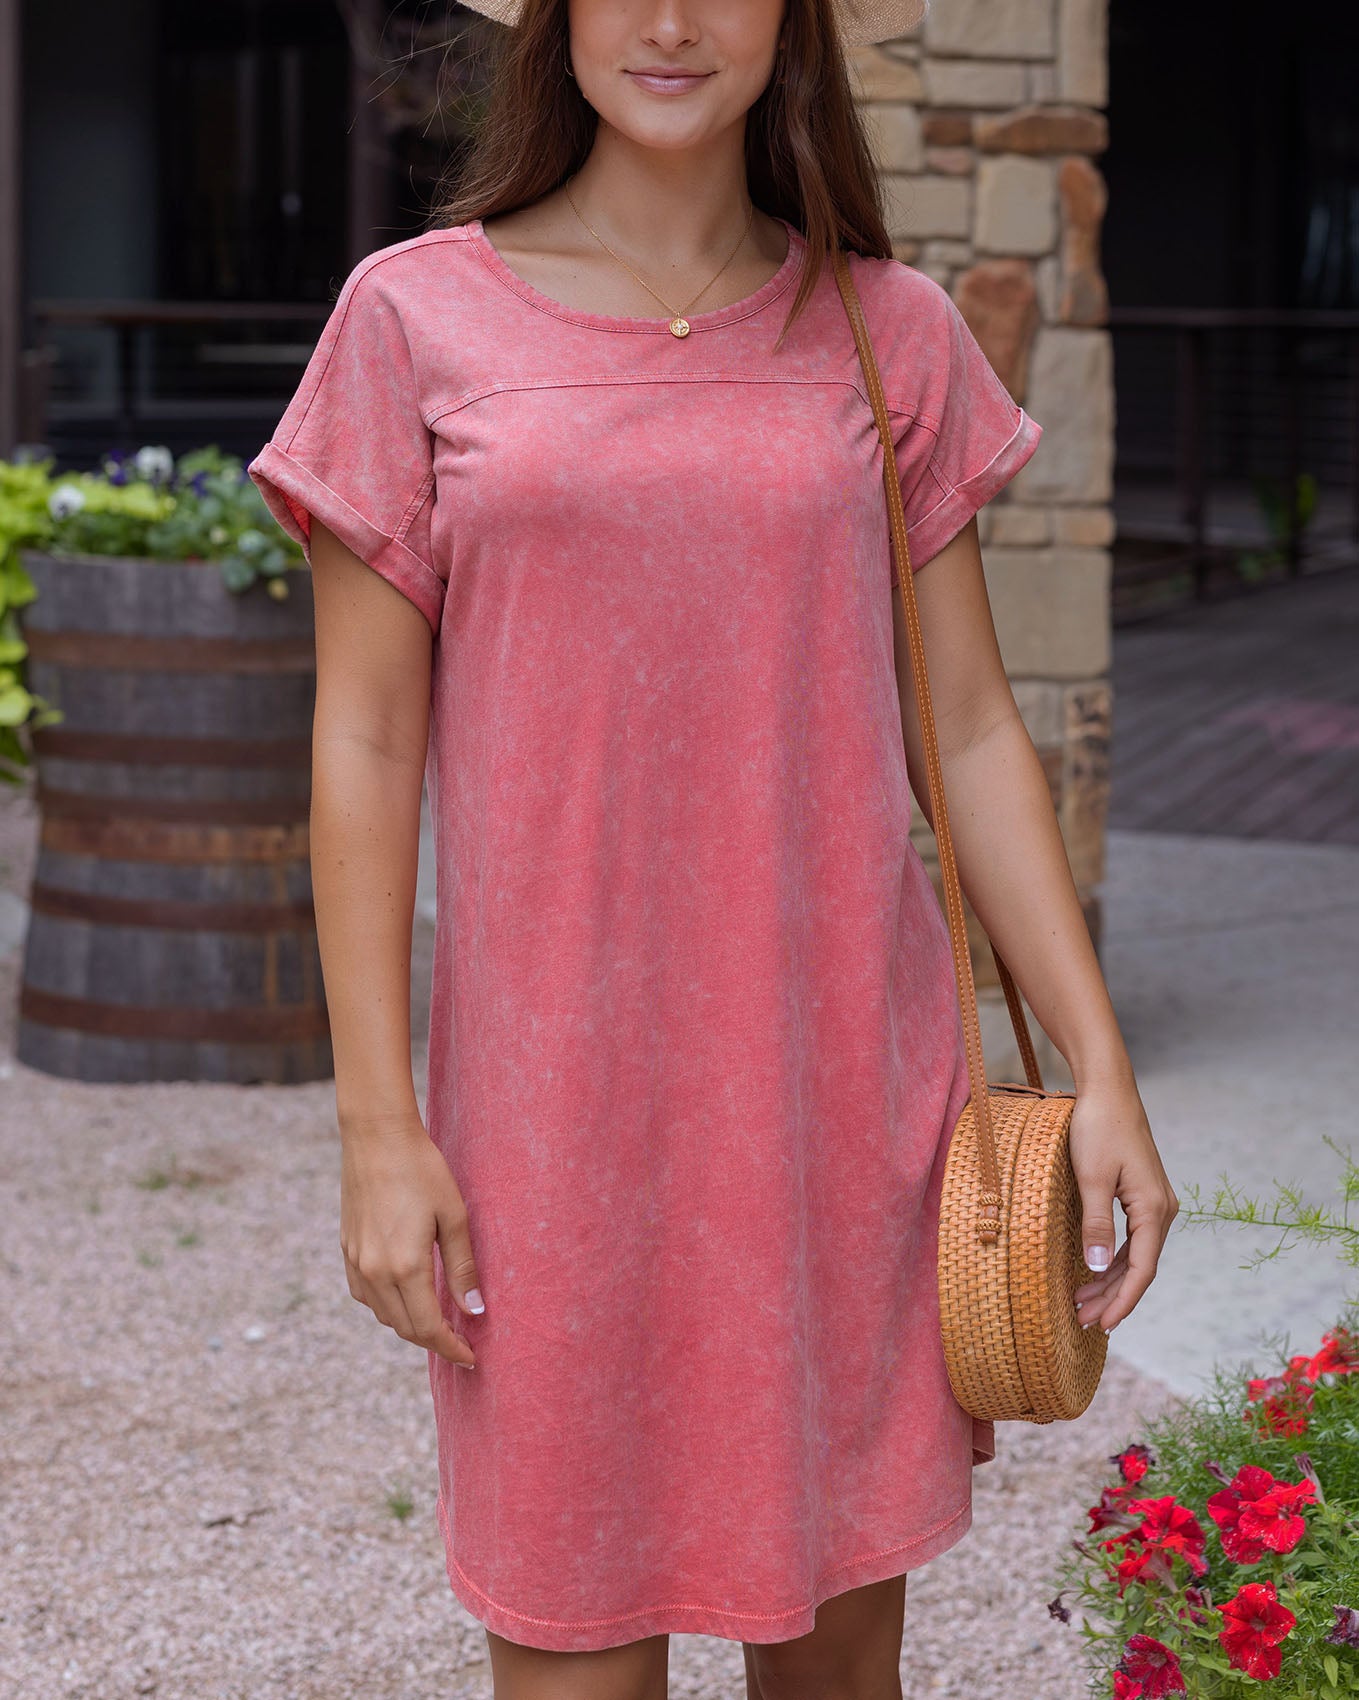 T-shirt dress Washed Pink Front